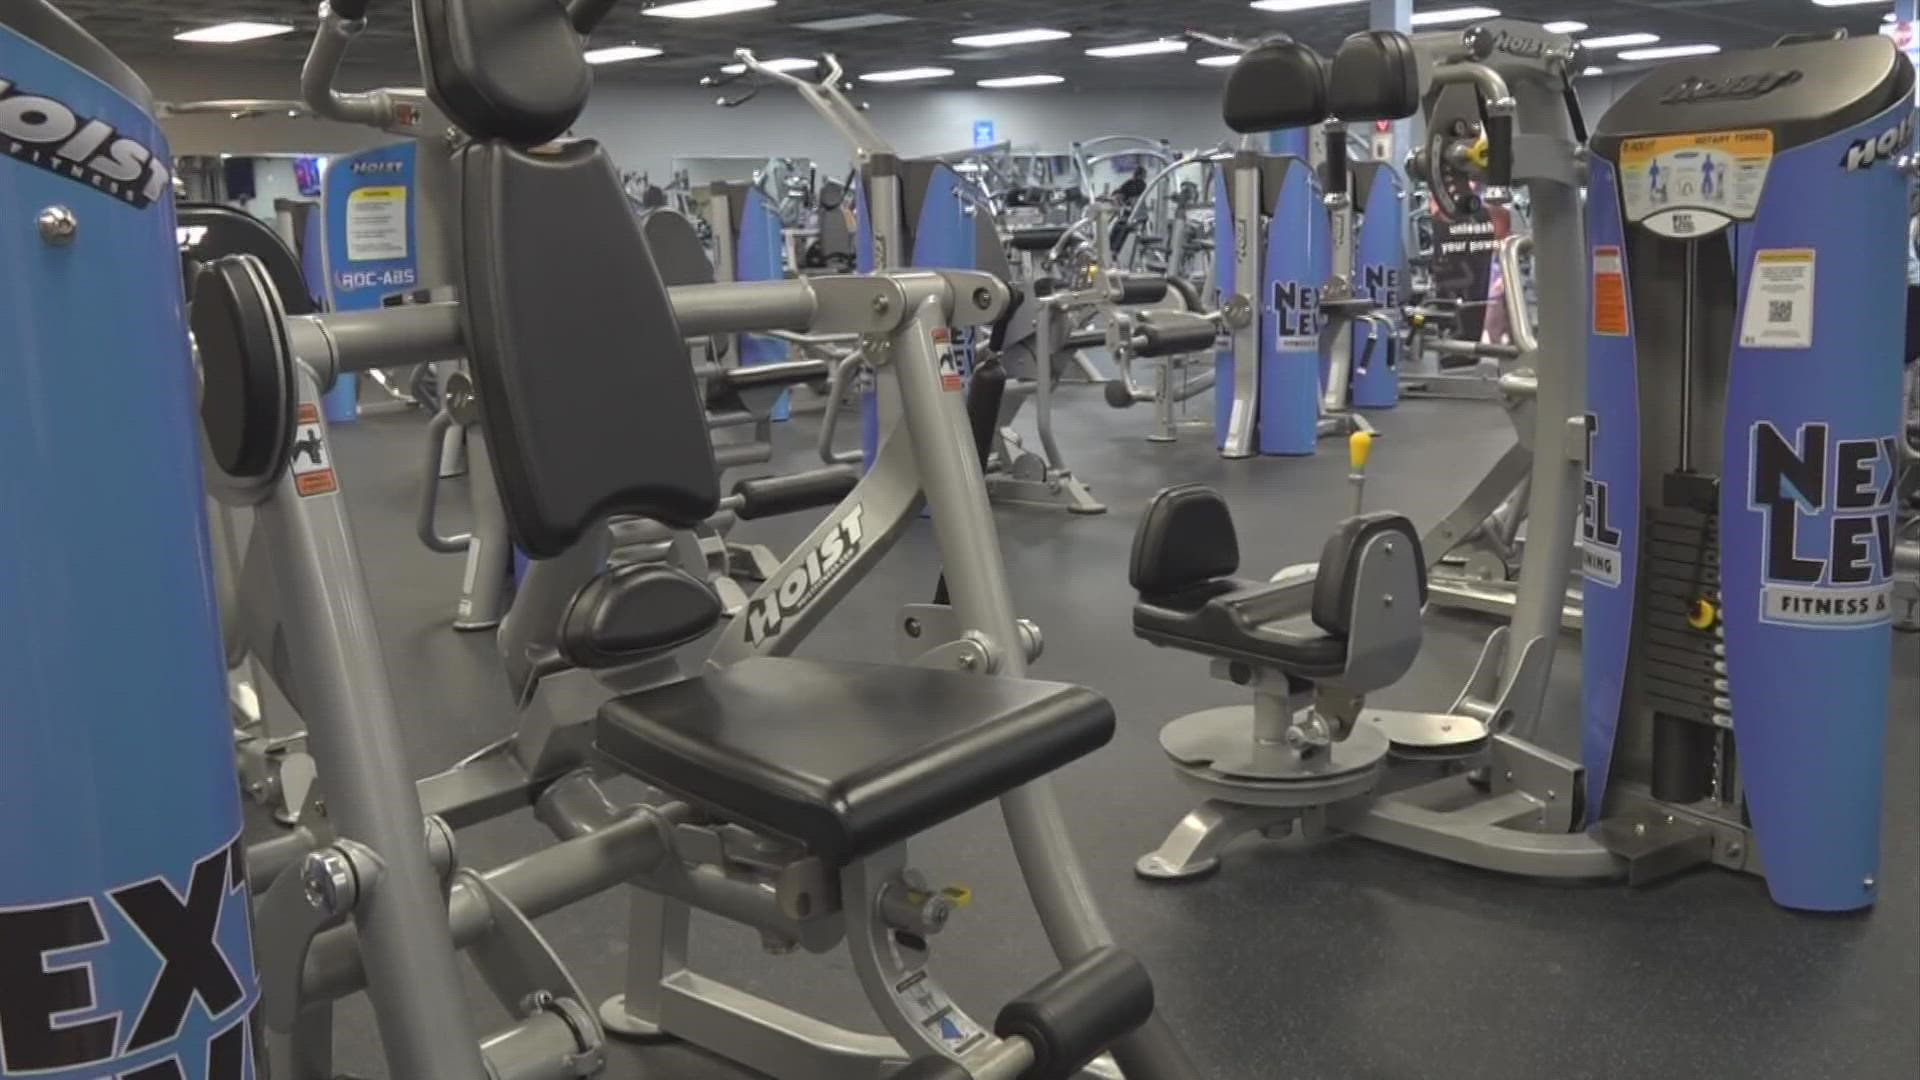 Keeping the New Year's resolutions we made to ourselves can be difficult. Mary Weber found a gym in Pickerington in late 2020 that helped her keep her resolution.